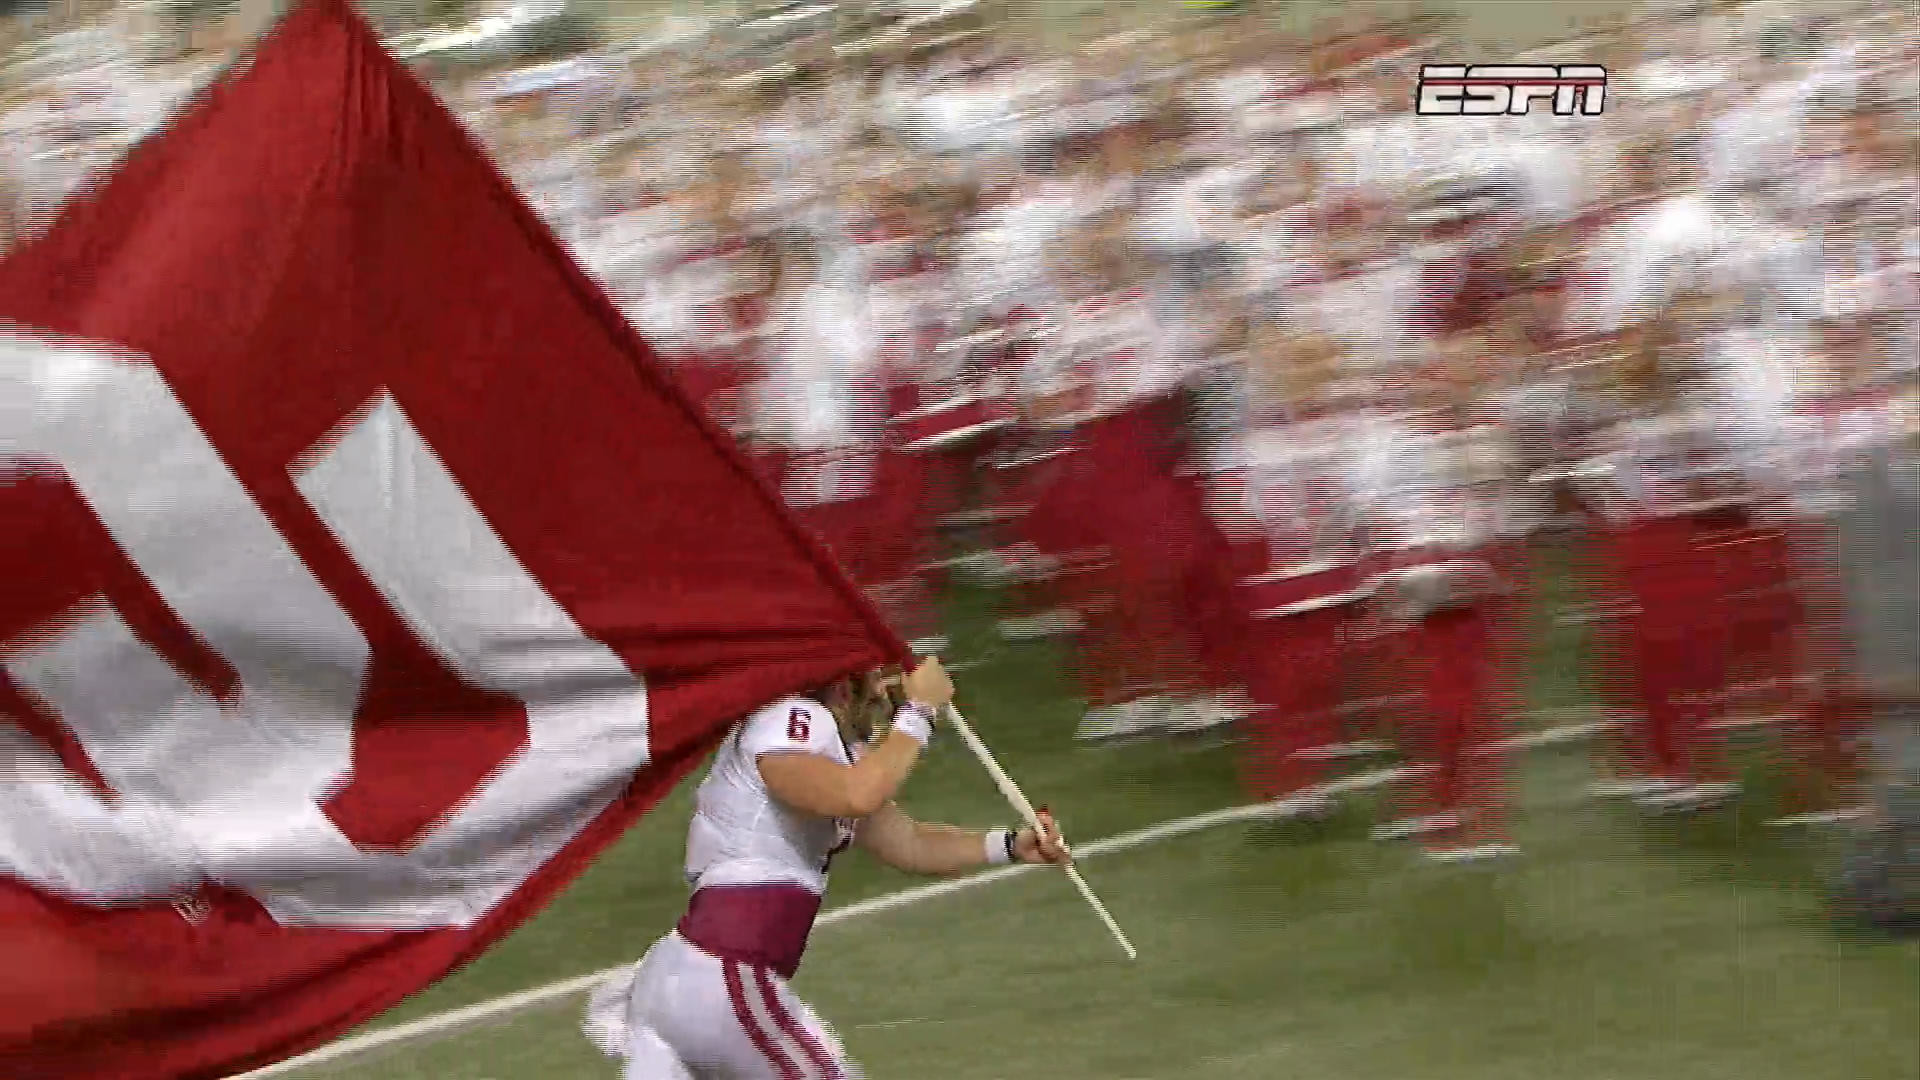 1920x1080 WATCH: Baker Mayfield plants OU flag in the middle of the Buckeye logo